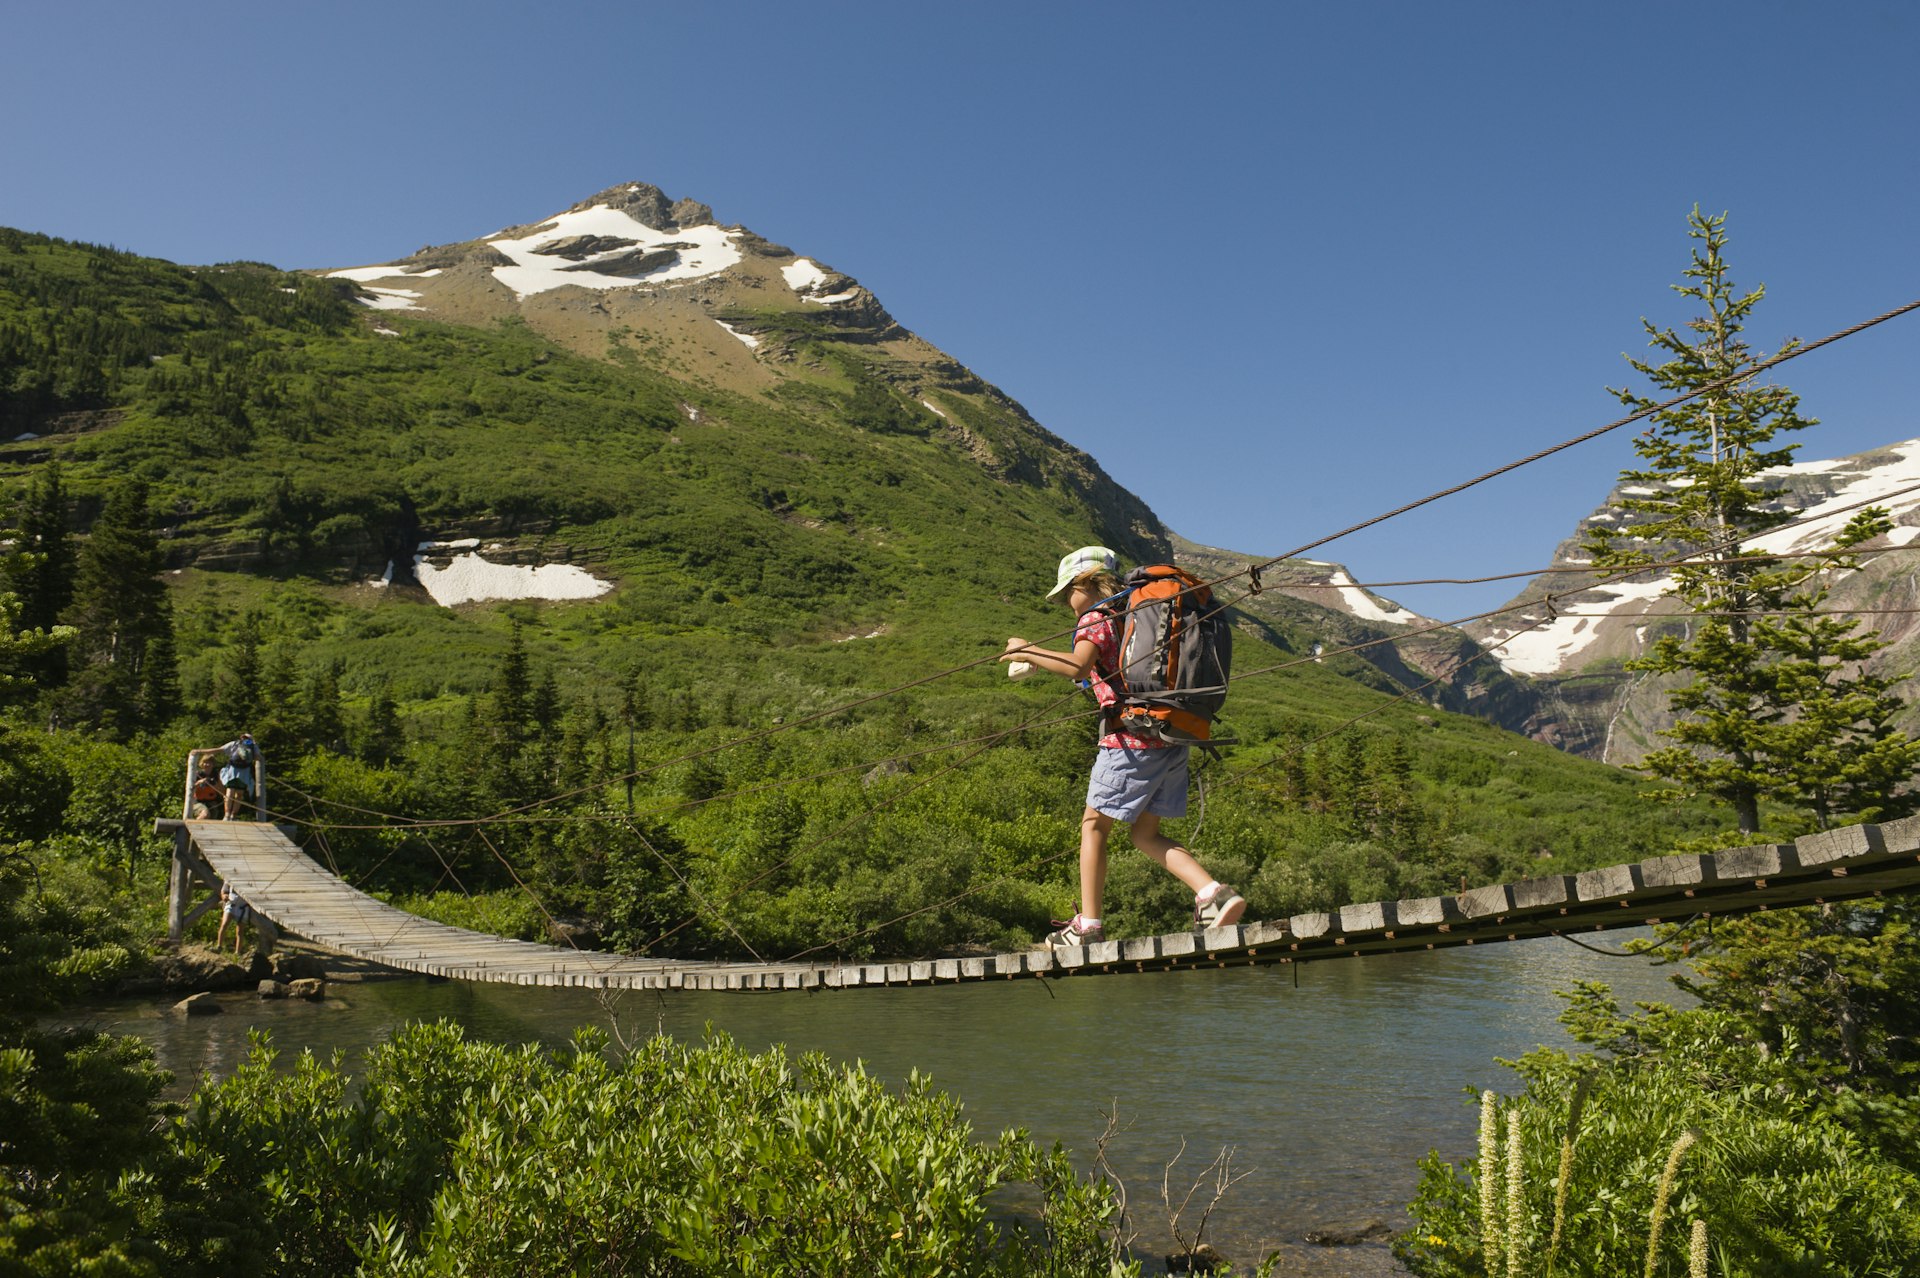 A young girl hikes over a suspension bridge in Glacier National Park, Montana.